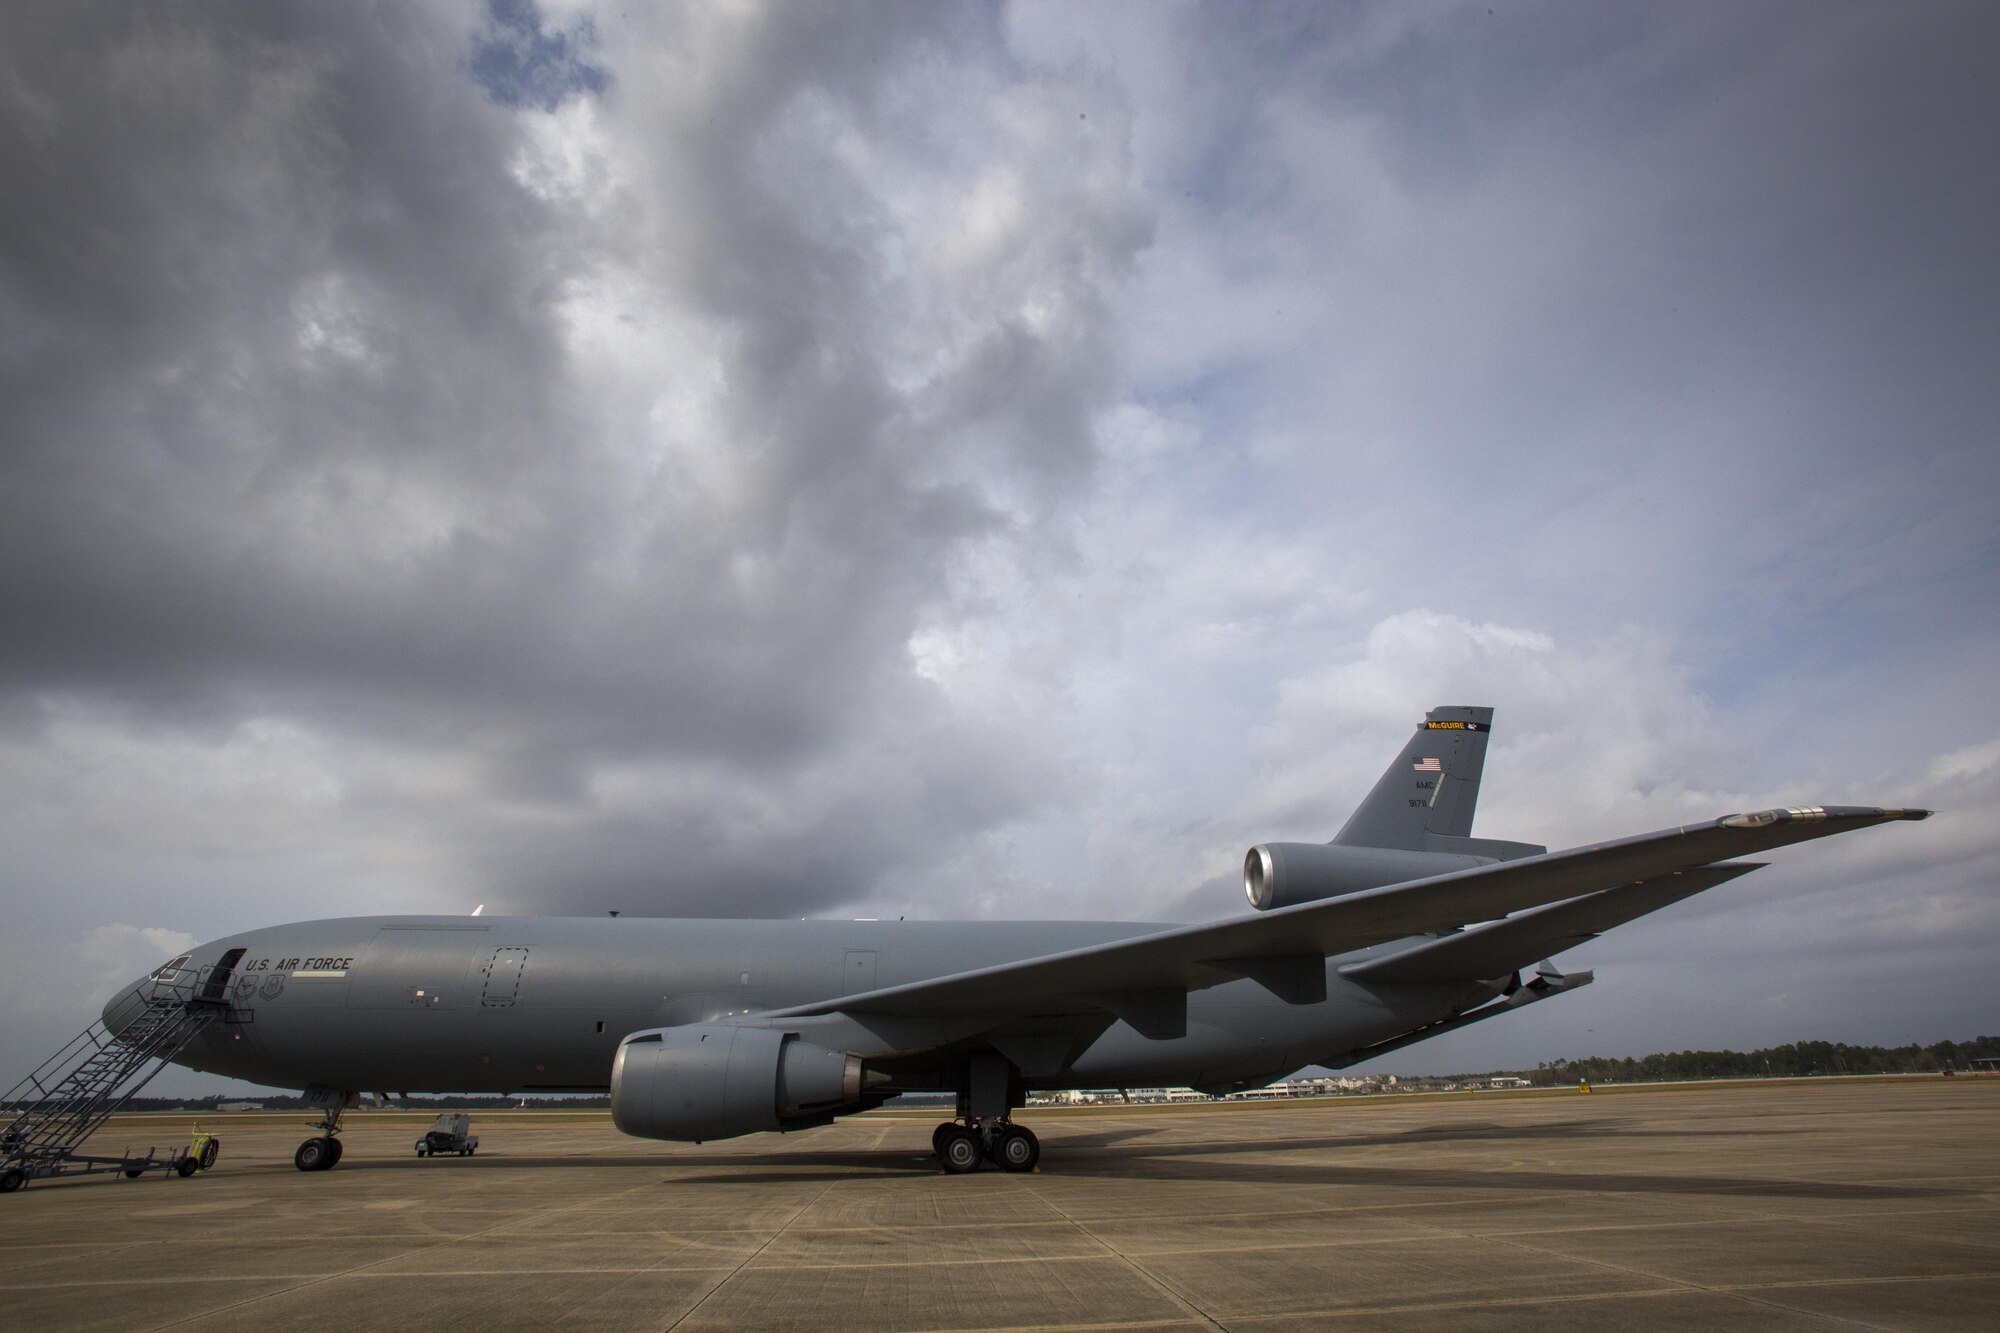 A KC-10 Extender with the 305th Air Mobility Wing is parked on the flight line at the Combat Readiness Training Center at Gulfport, Miss., in support of Crisis Response '17 March 5, 2017. Close to 700 Air Mobility Command Airmen with the 514th Air Mobility Wing, the 305th Air Mobility Wing, the 87th Air Base Wing, and the 621st Contingency Response Wing are participating in the mobilization exercise. (U.S. Air Force photo by Master Sgt. Mark C. Olsen/Released